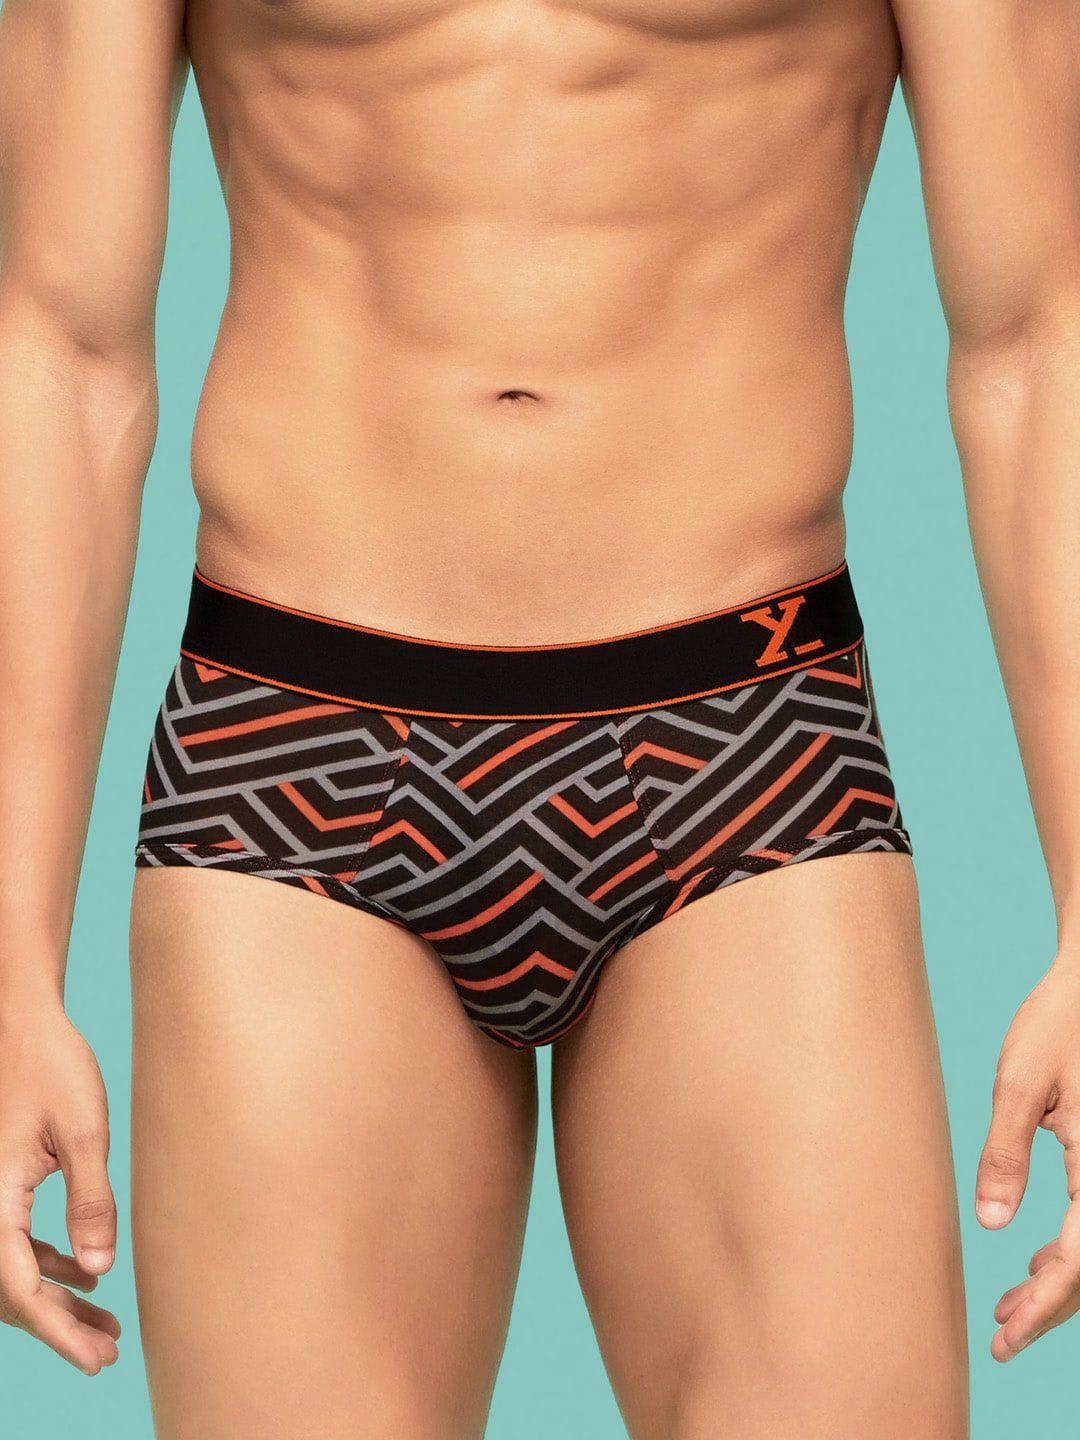 xyxx-assorted-geometric-printed-anti-bacterial-pure-cotton-basic-briefs-xybrf206